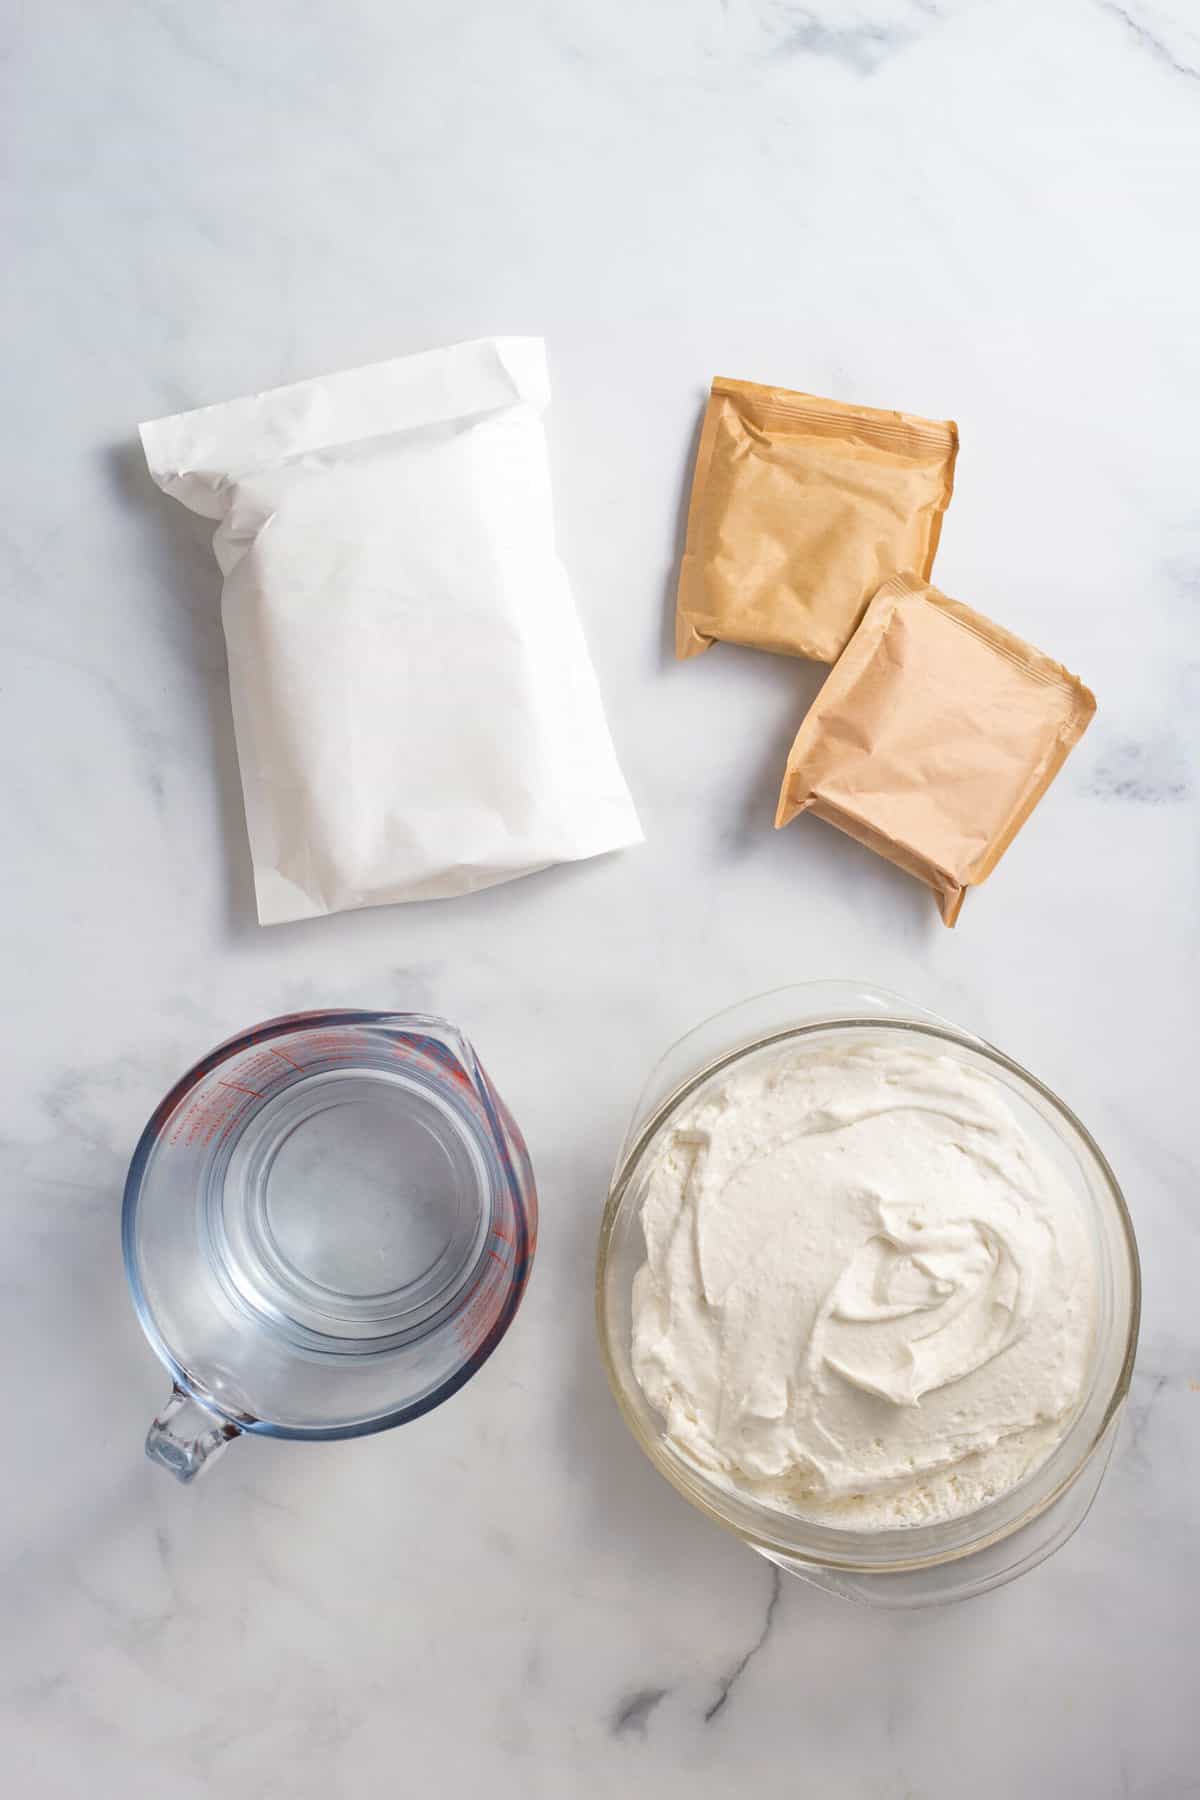 ingredients to make red, white and blue jello poke cake